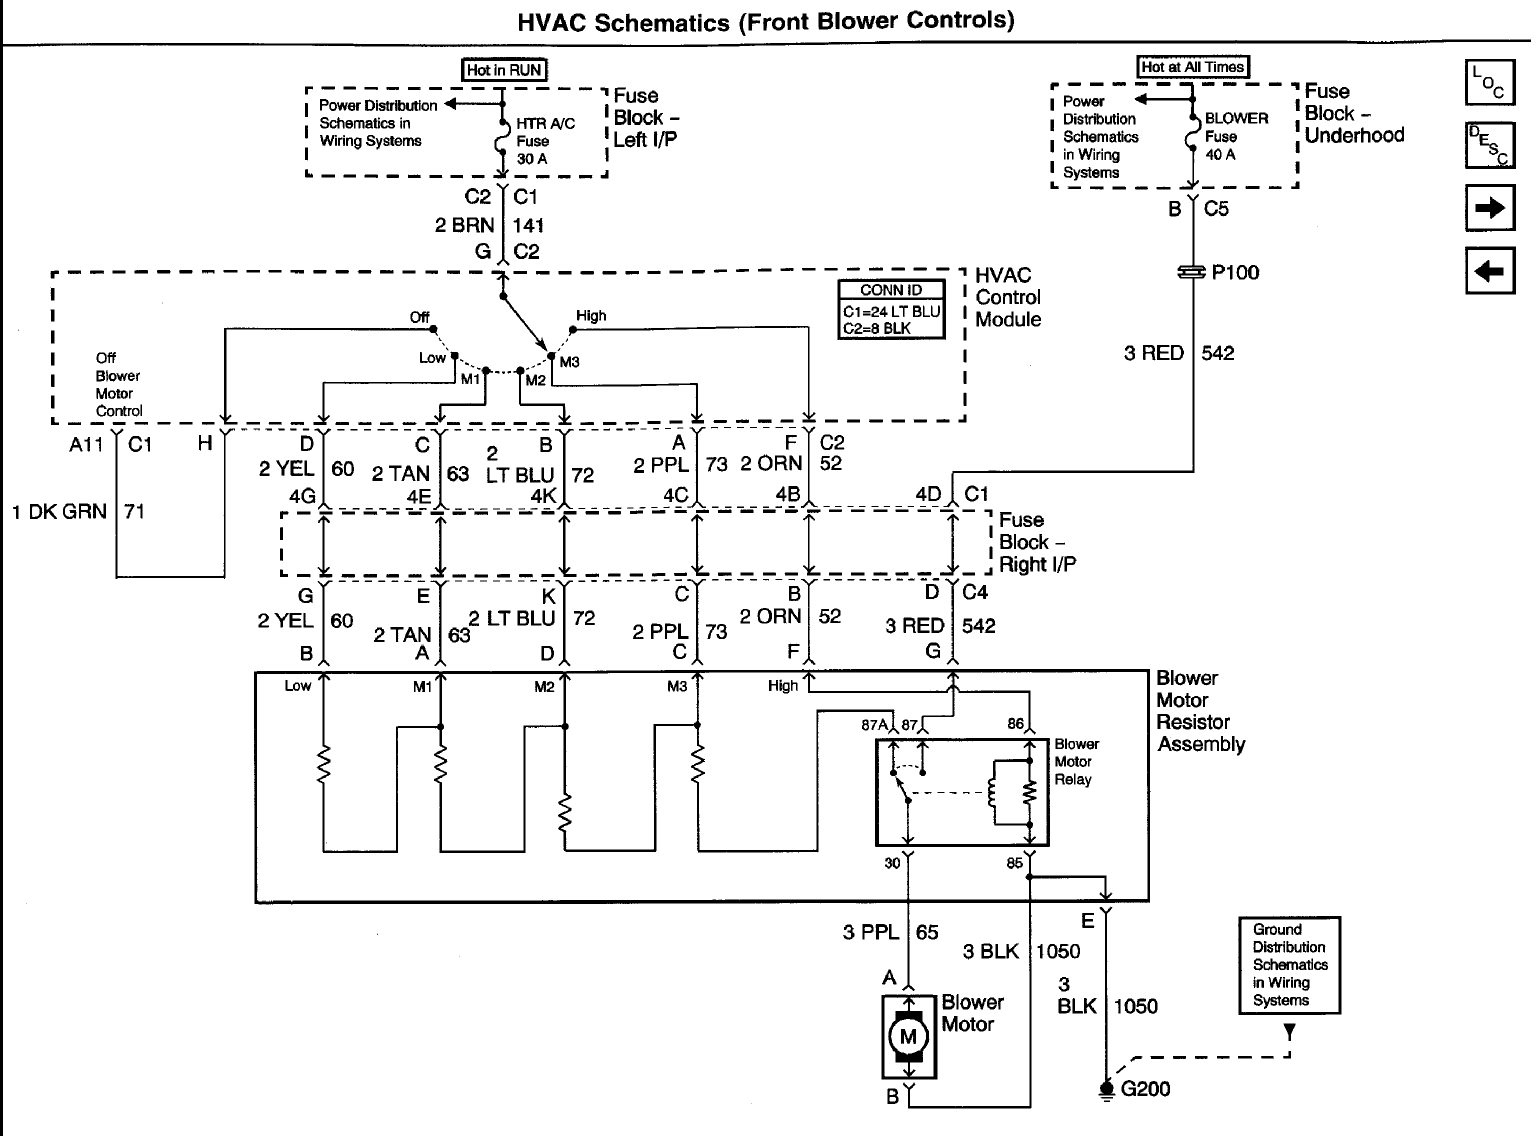 2003 Chevy Tahoe Wiring Diagram - I am trying to get wiring diagrams